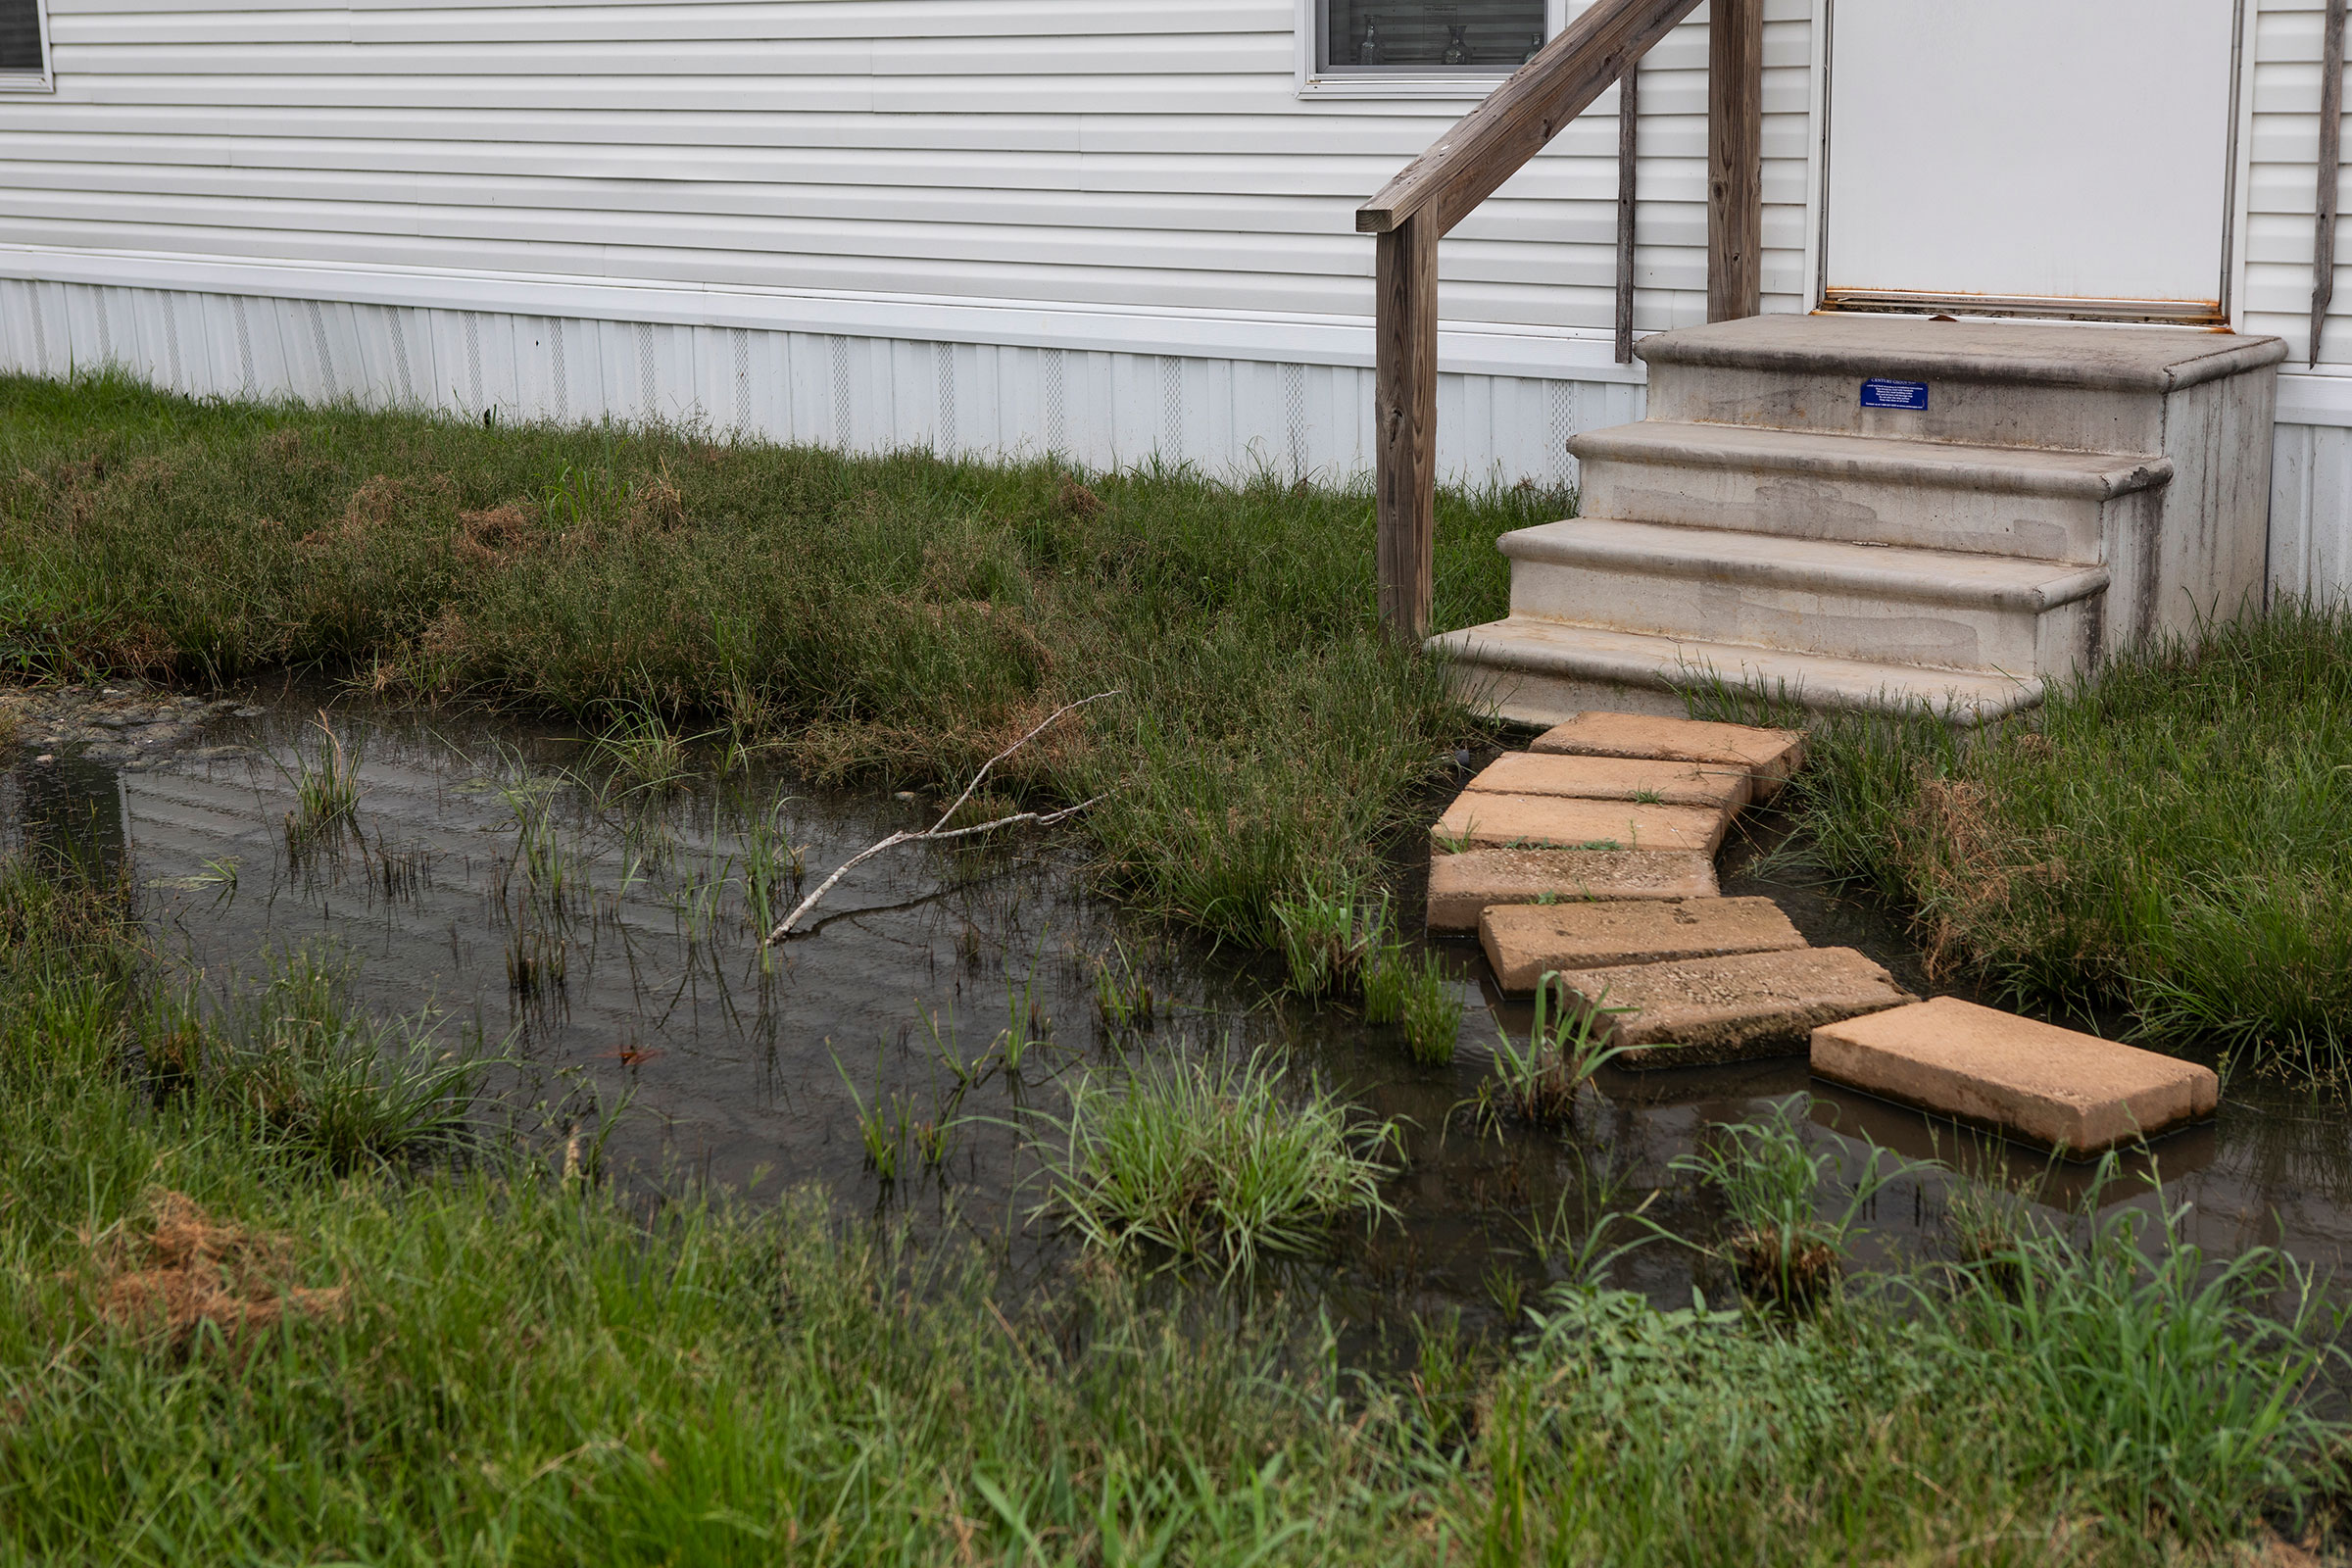 Sewage fills the front yard of a home in Lowndes County, Ala. on Aug. 1, 2022. (Charity Rachelle for TIME)